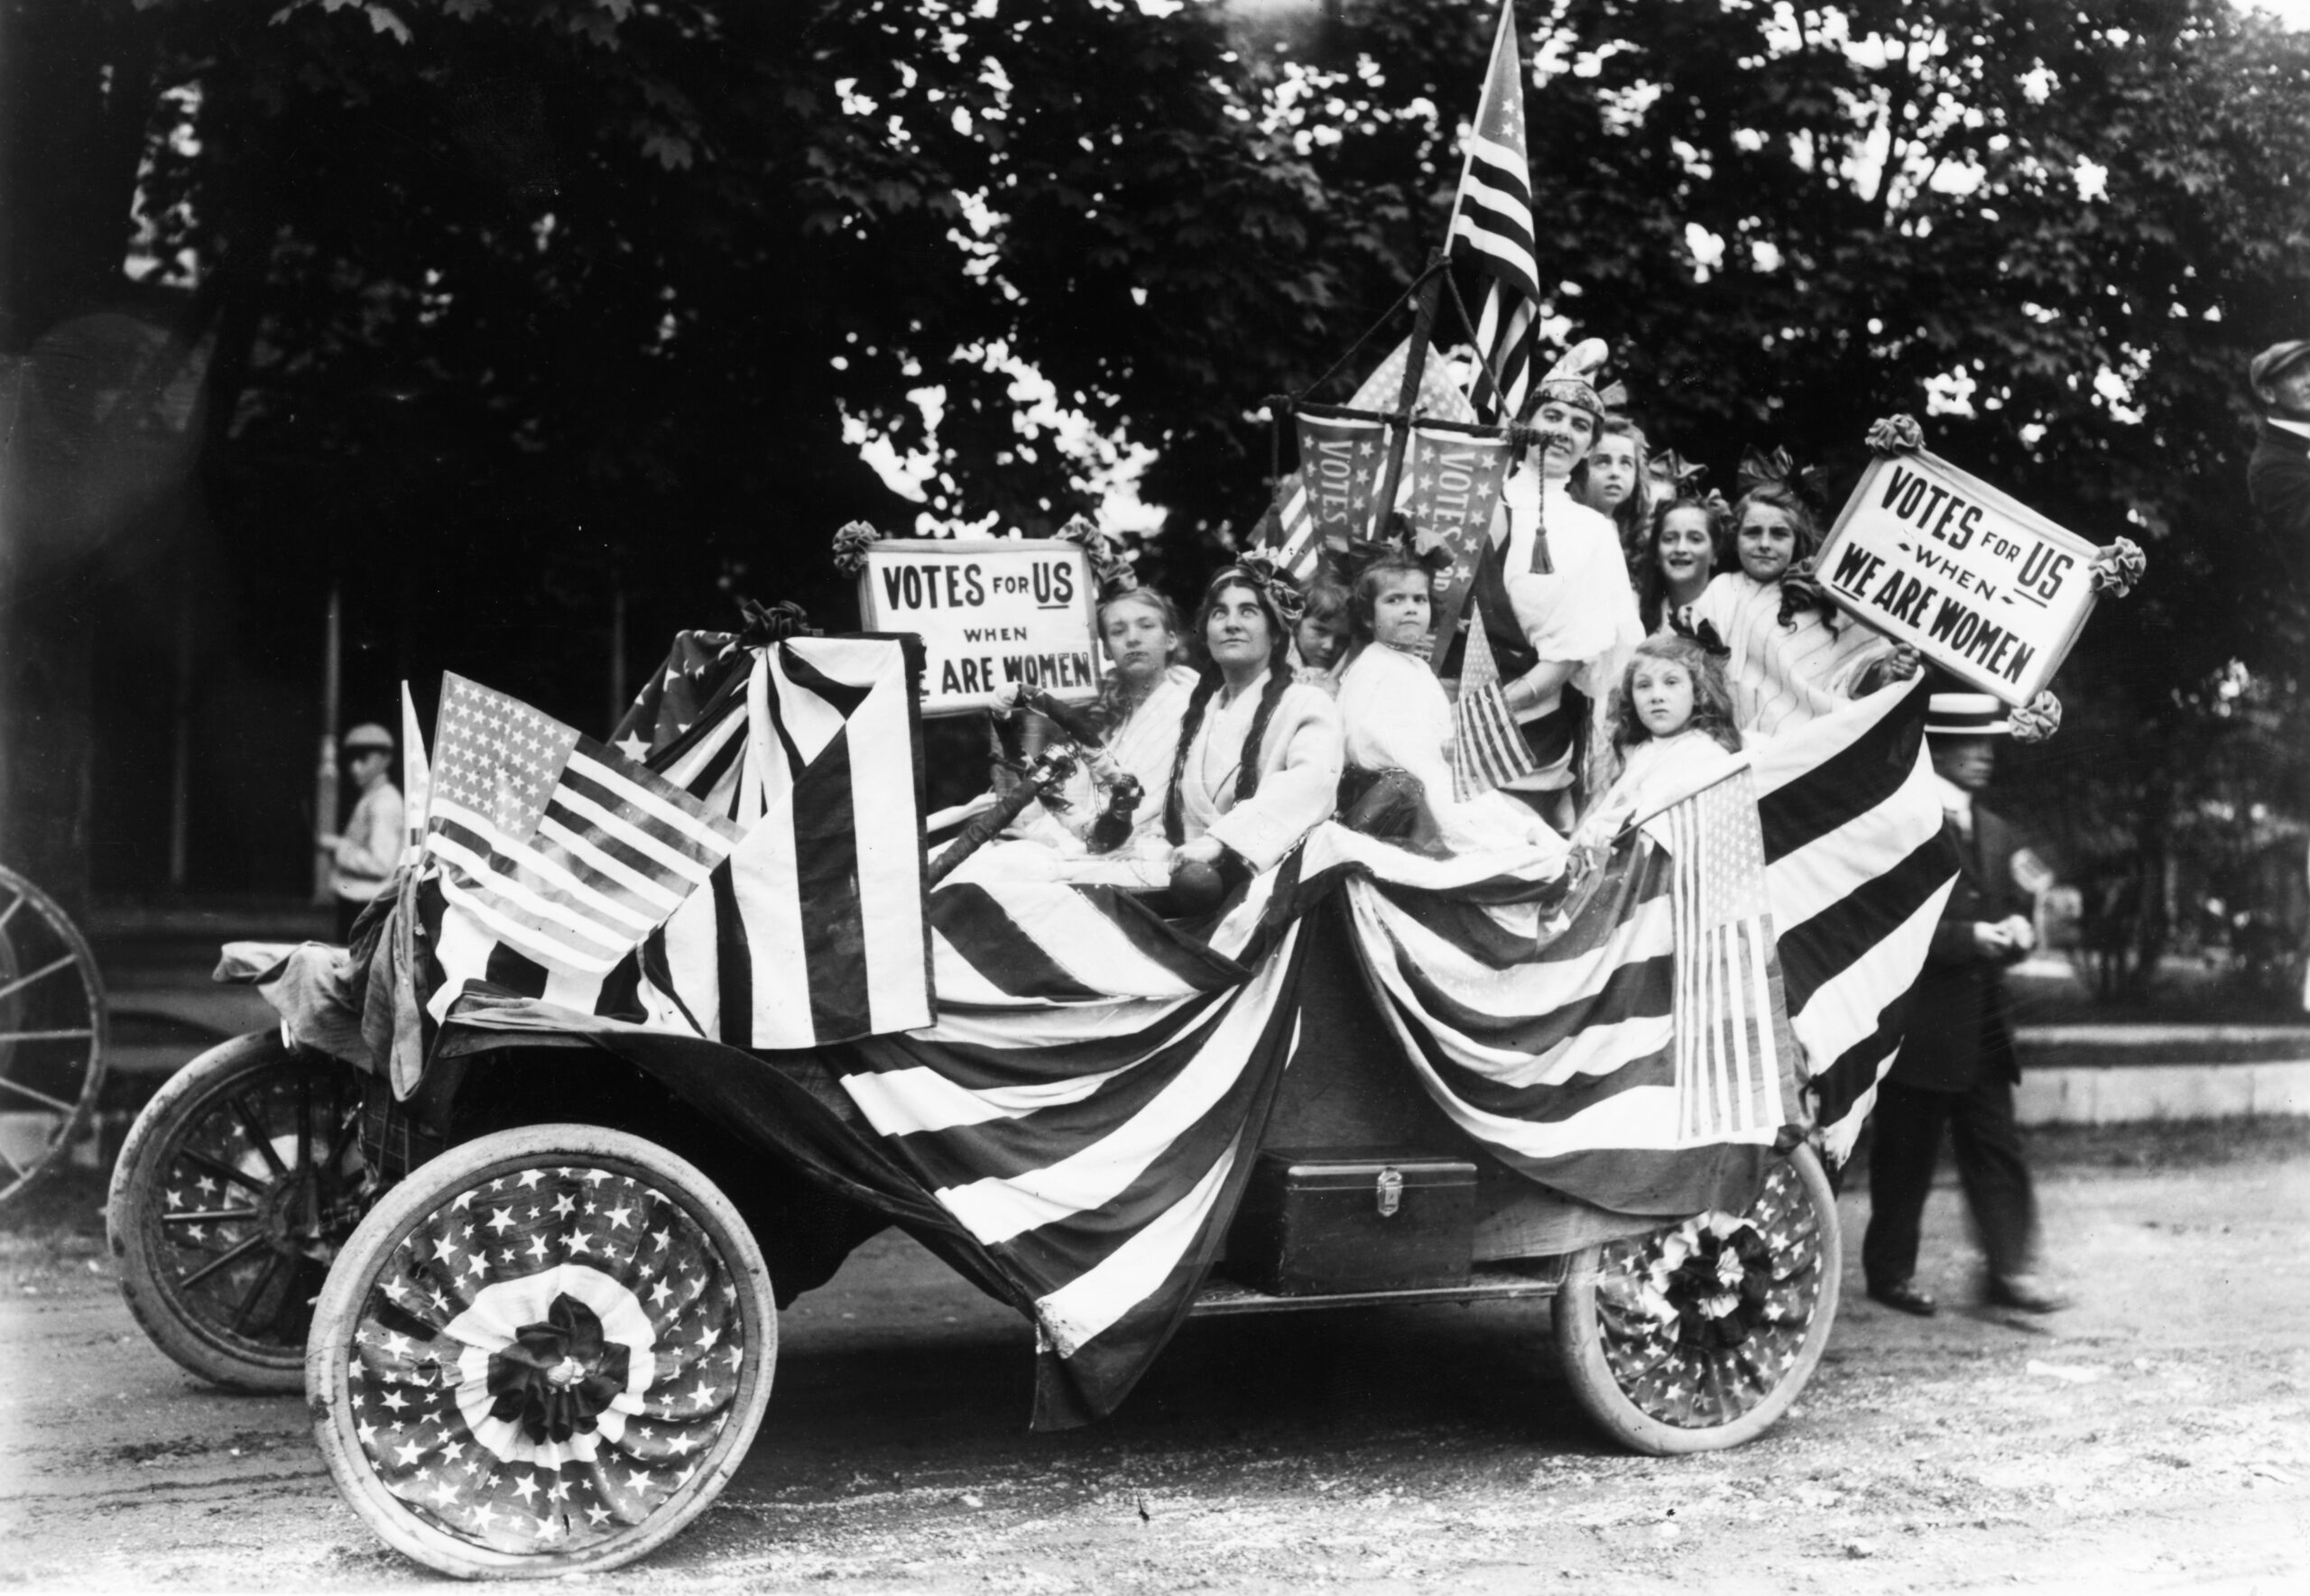 Women’s suffrage parade in Long Island, New York, 1913 (MPI/Getty Images)